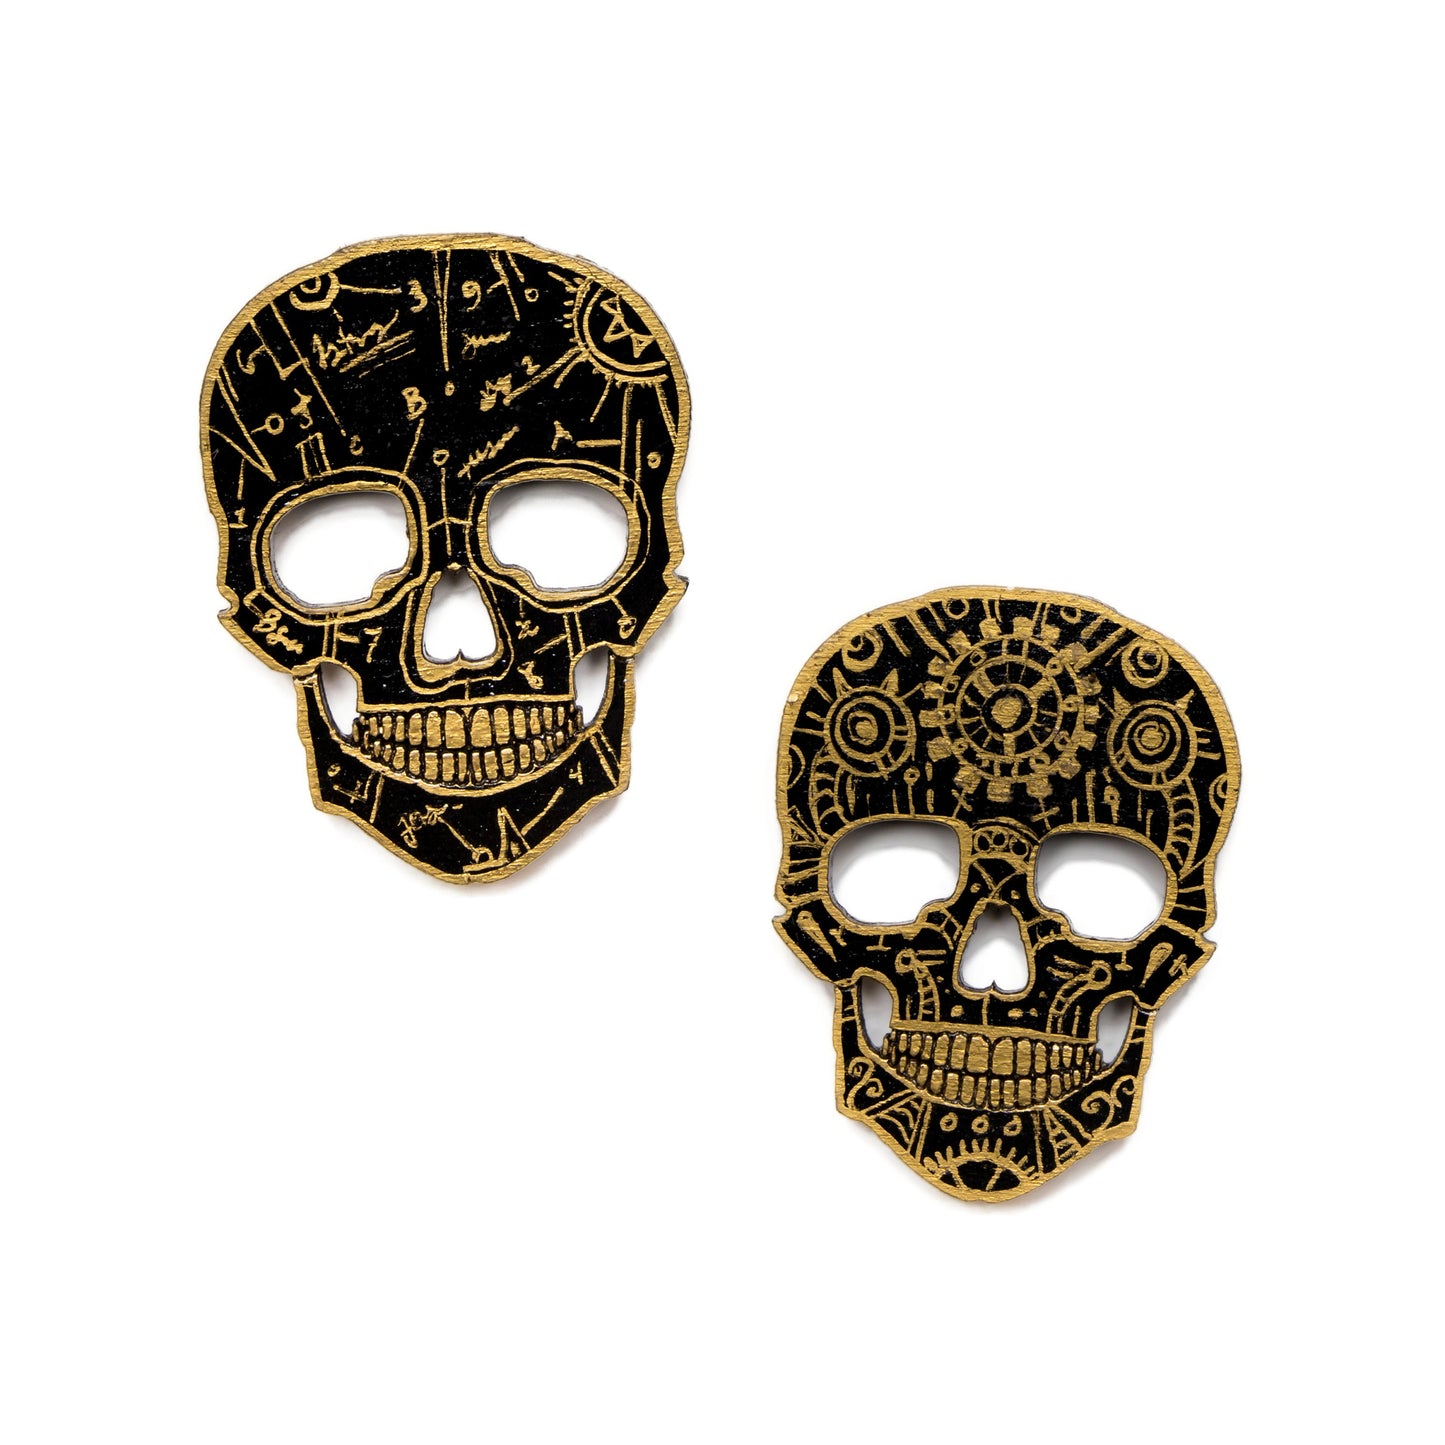 Skull Wood Magnet Set Of Two-Black & Gold-Anatomical Skull-Steampunk Skull-Hand Painted Wood Magnet-Gothic Home Decor-Gifts-Fridge Decor